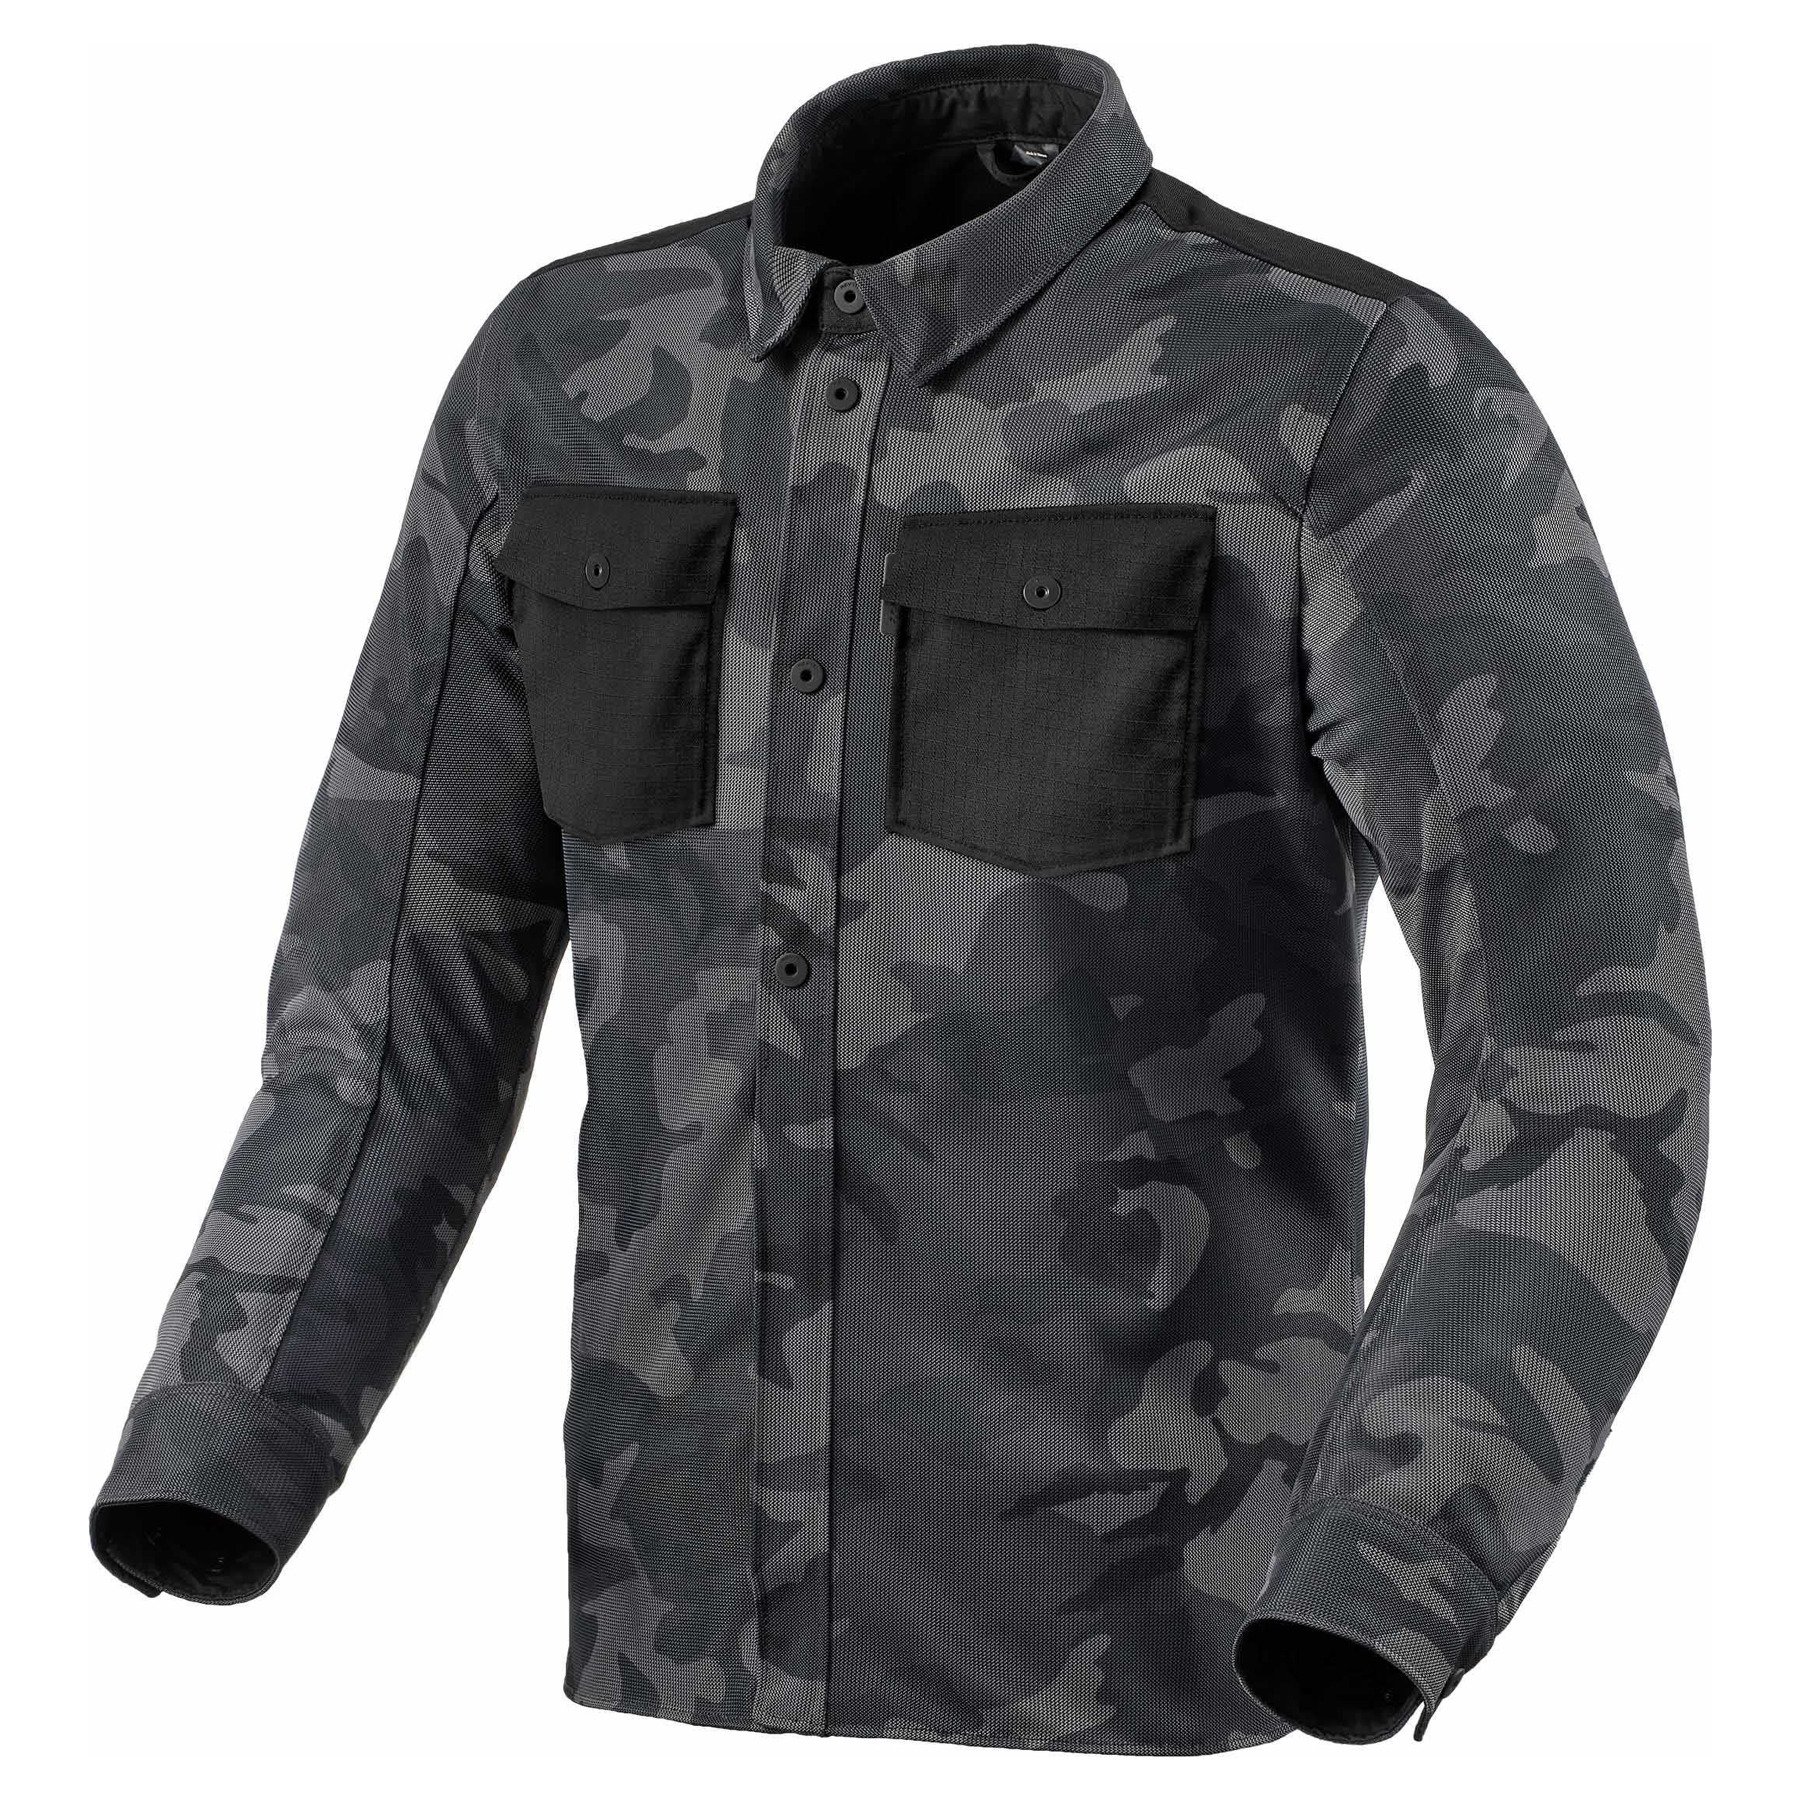 Image of REV'IT! Overshirt Tracer Air 2 Jacket Camo Dark Gray Size S ID 8700001317146